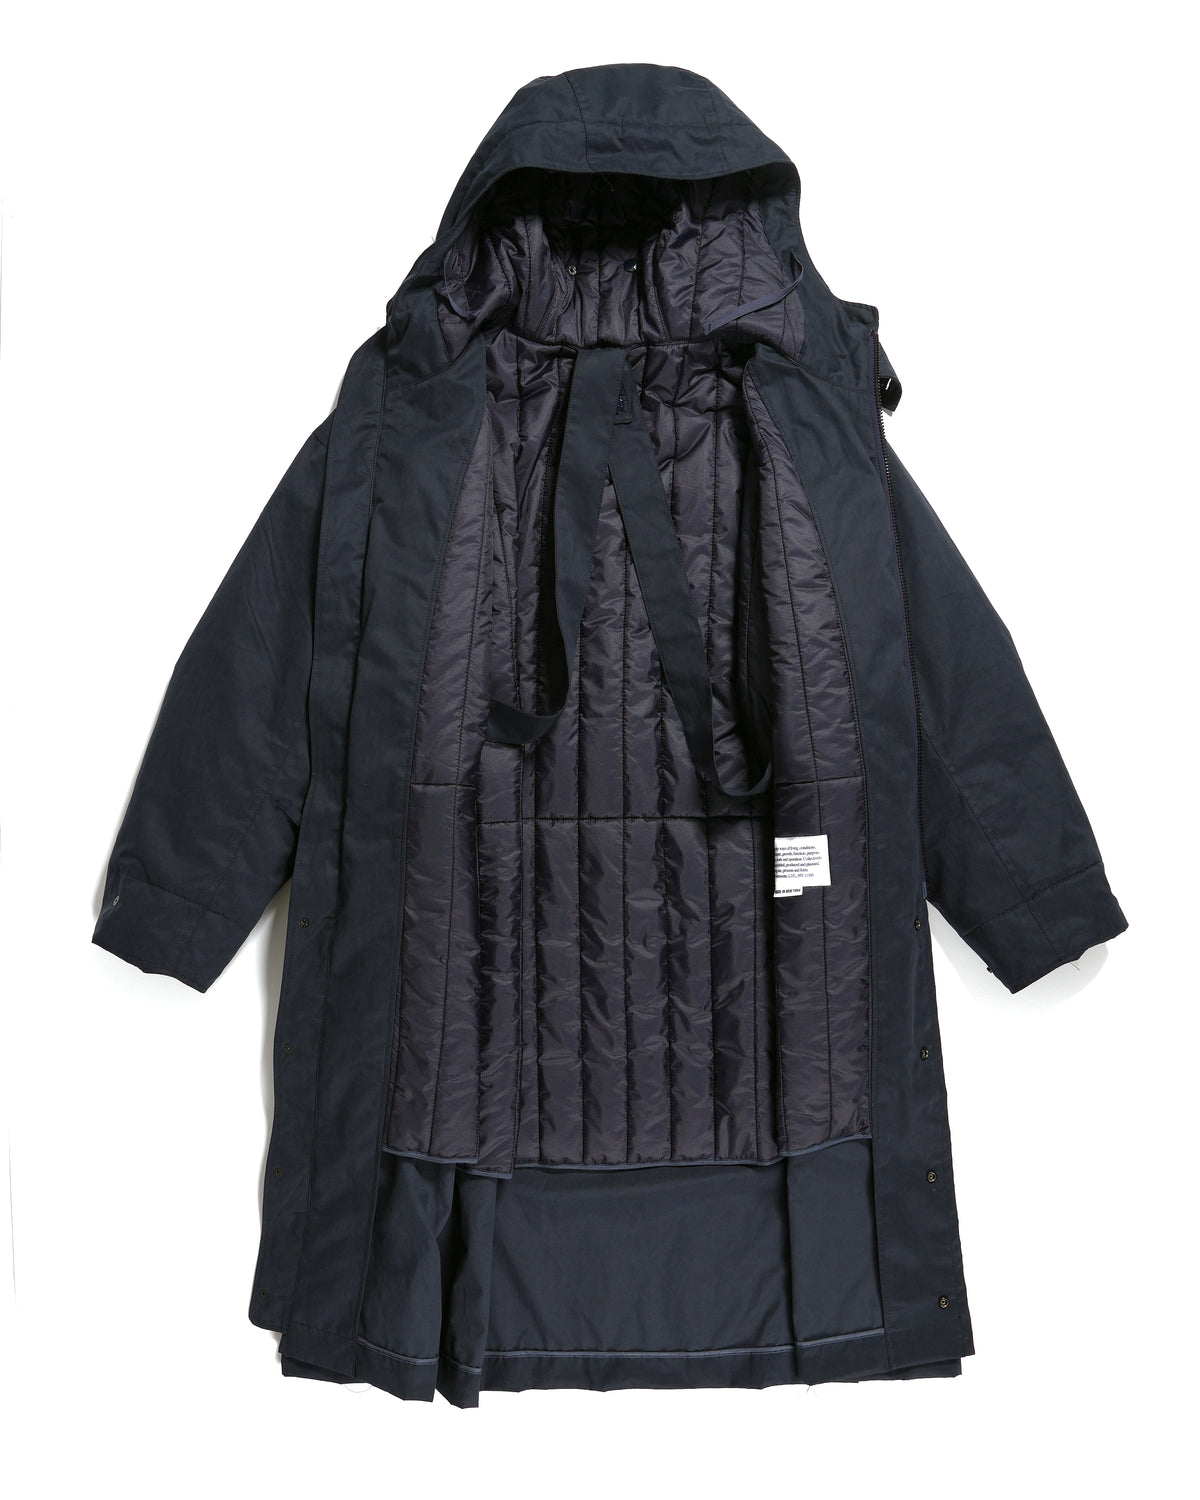 Dk. New Coated | Nepenthes - PC York Navy Coat Cloth Storm